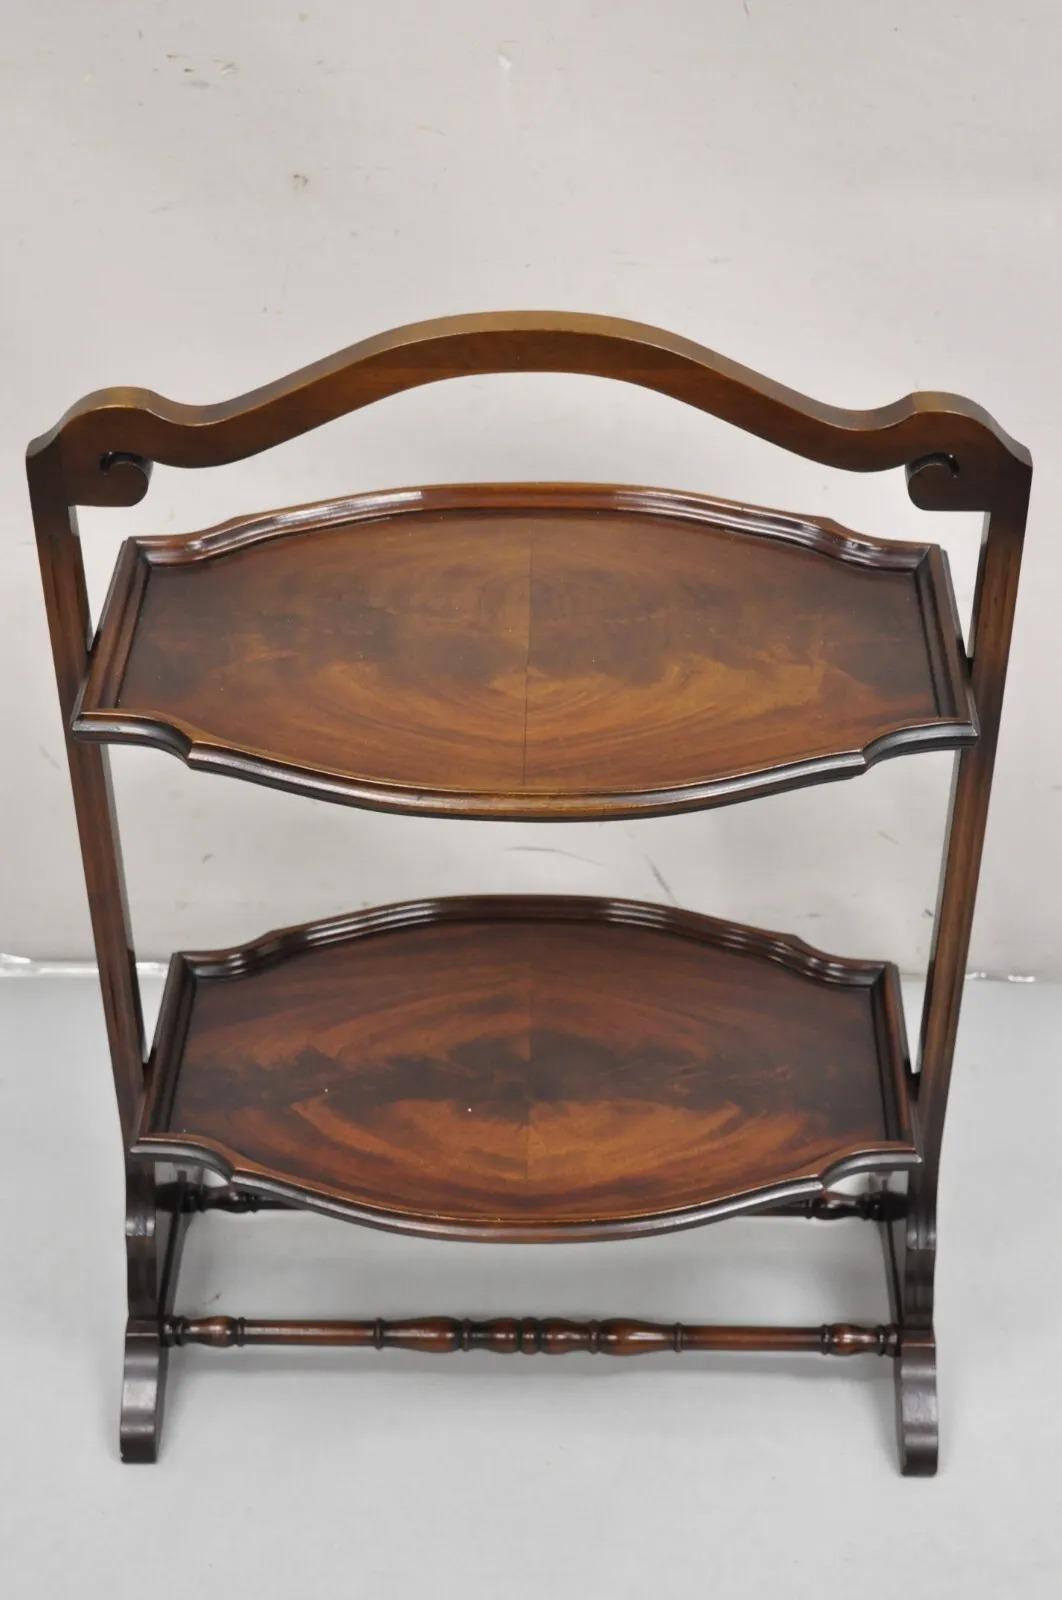 Vintage Regency Style Mahogany 2 Tier Folding Muffin Cake Stand Side Table In Good Condition For Sale In Philadelphia, PA